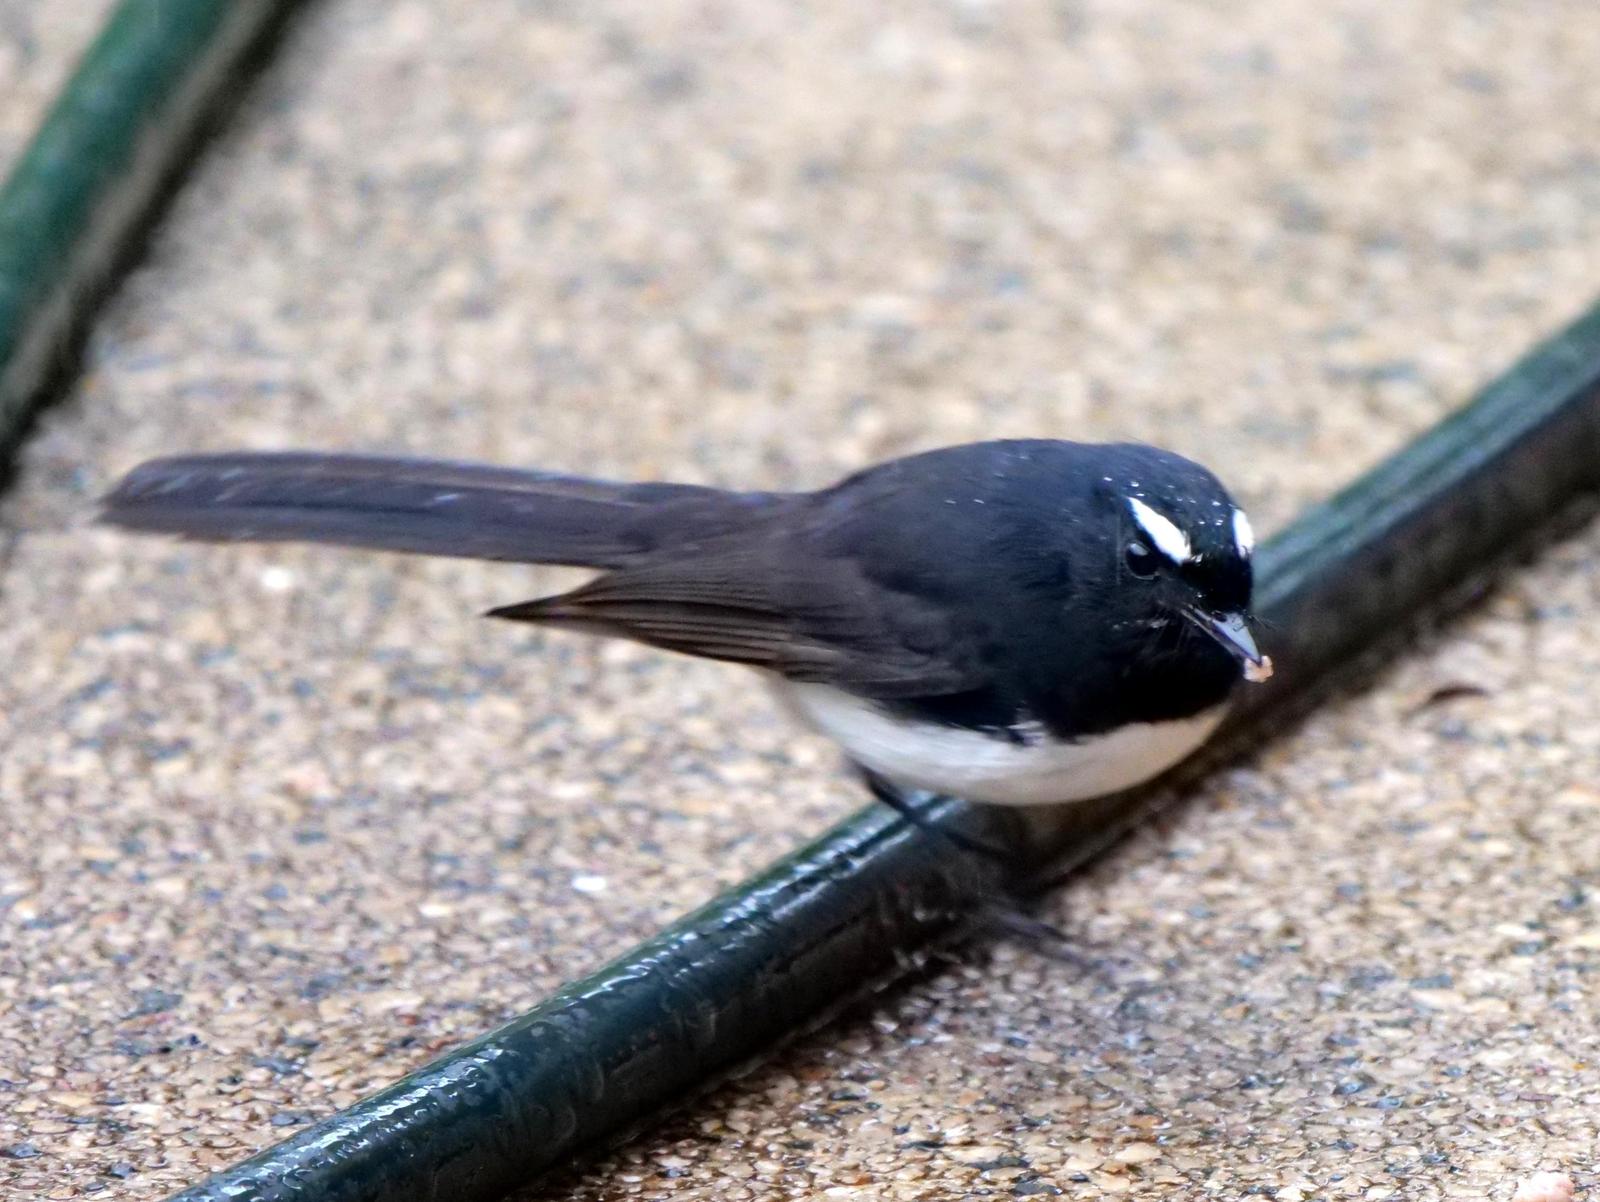 Willie-wagtail Photo by Peter Lowe